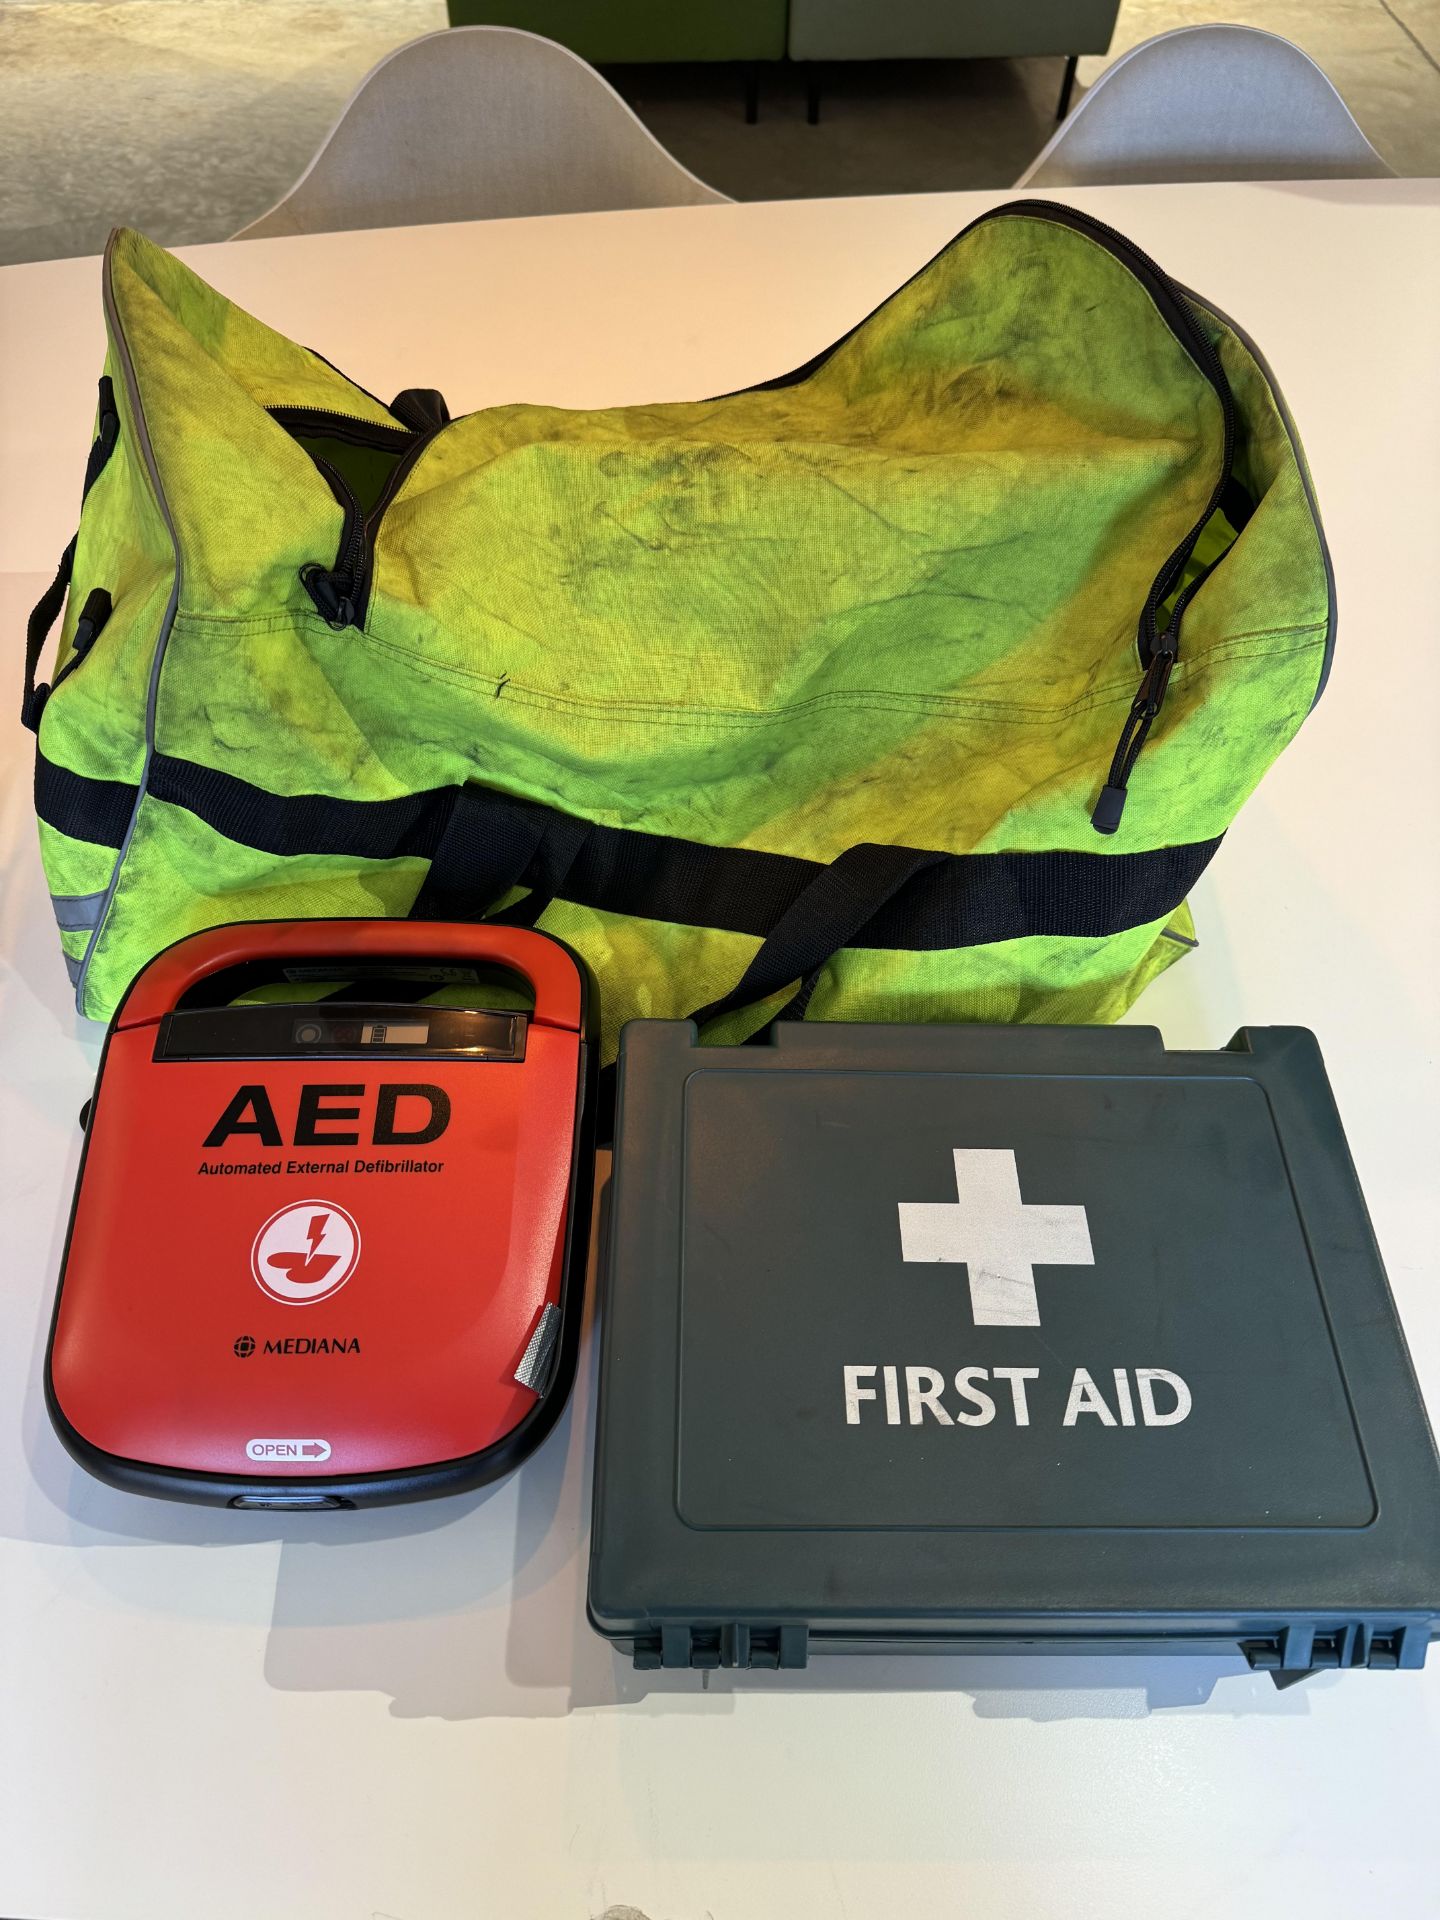 Defibrillator & First Aid Kit - Image 8 of 8